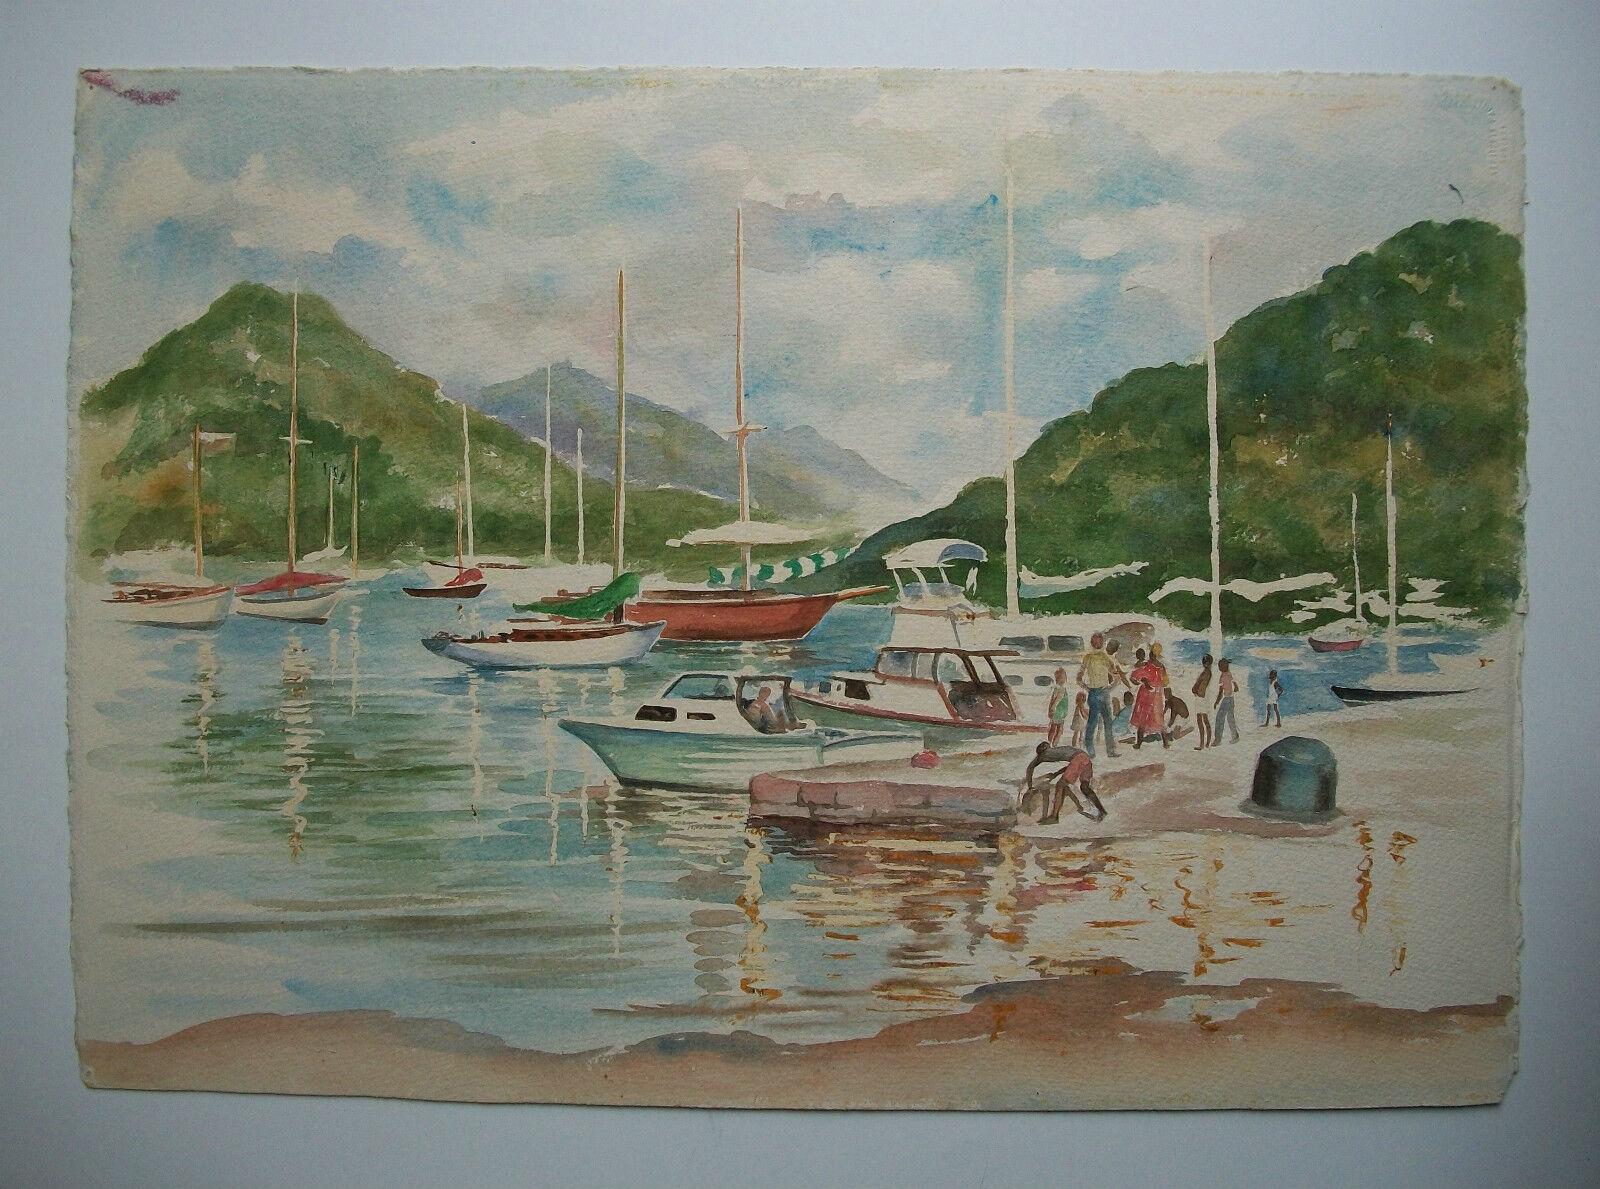 MARGARET COCHRANE - 'Mill Houses on the Moselle River - France' - double sided watercolor painting on Arches paper - signed lower right - unframed - harbor view with boats verso - circa 1980's

Excellent vintage condition - no loss - no restoration